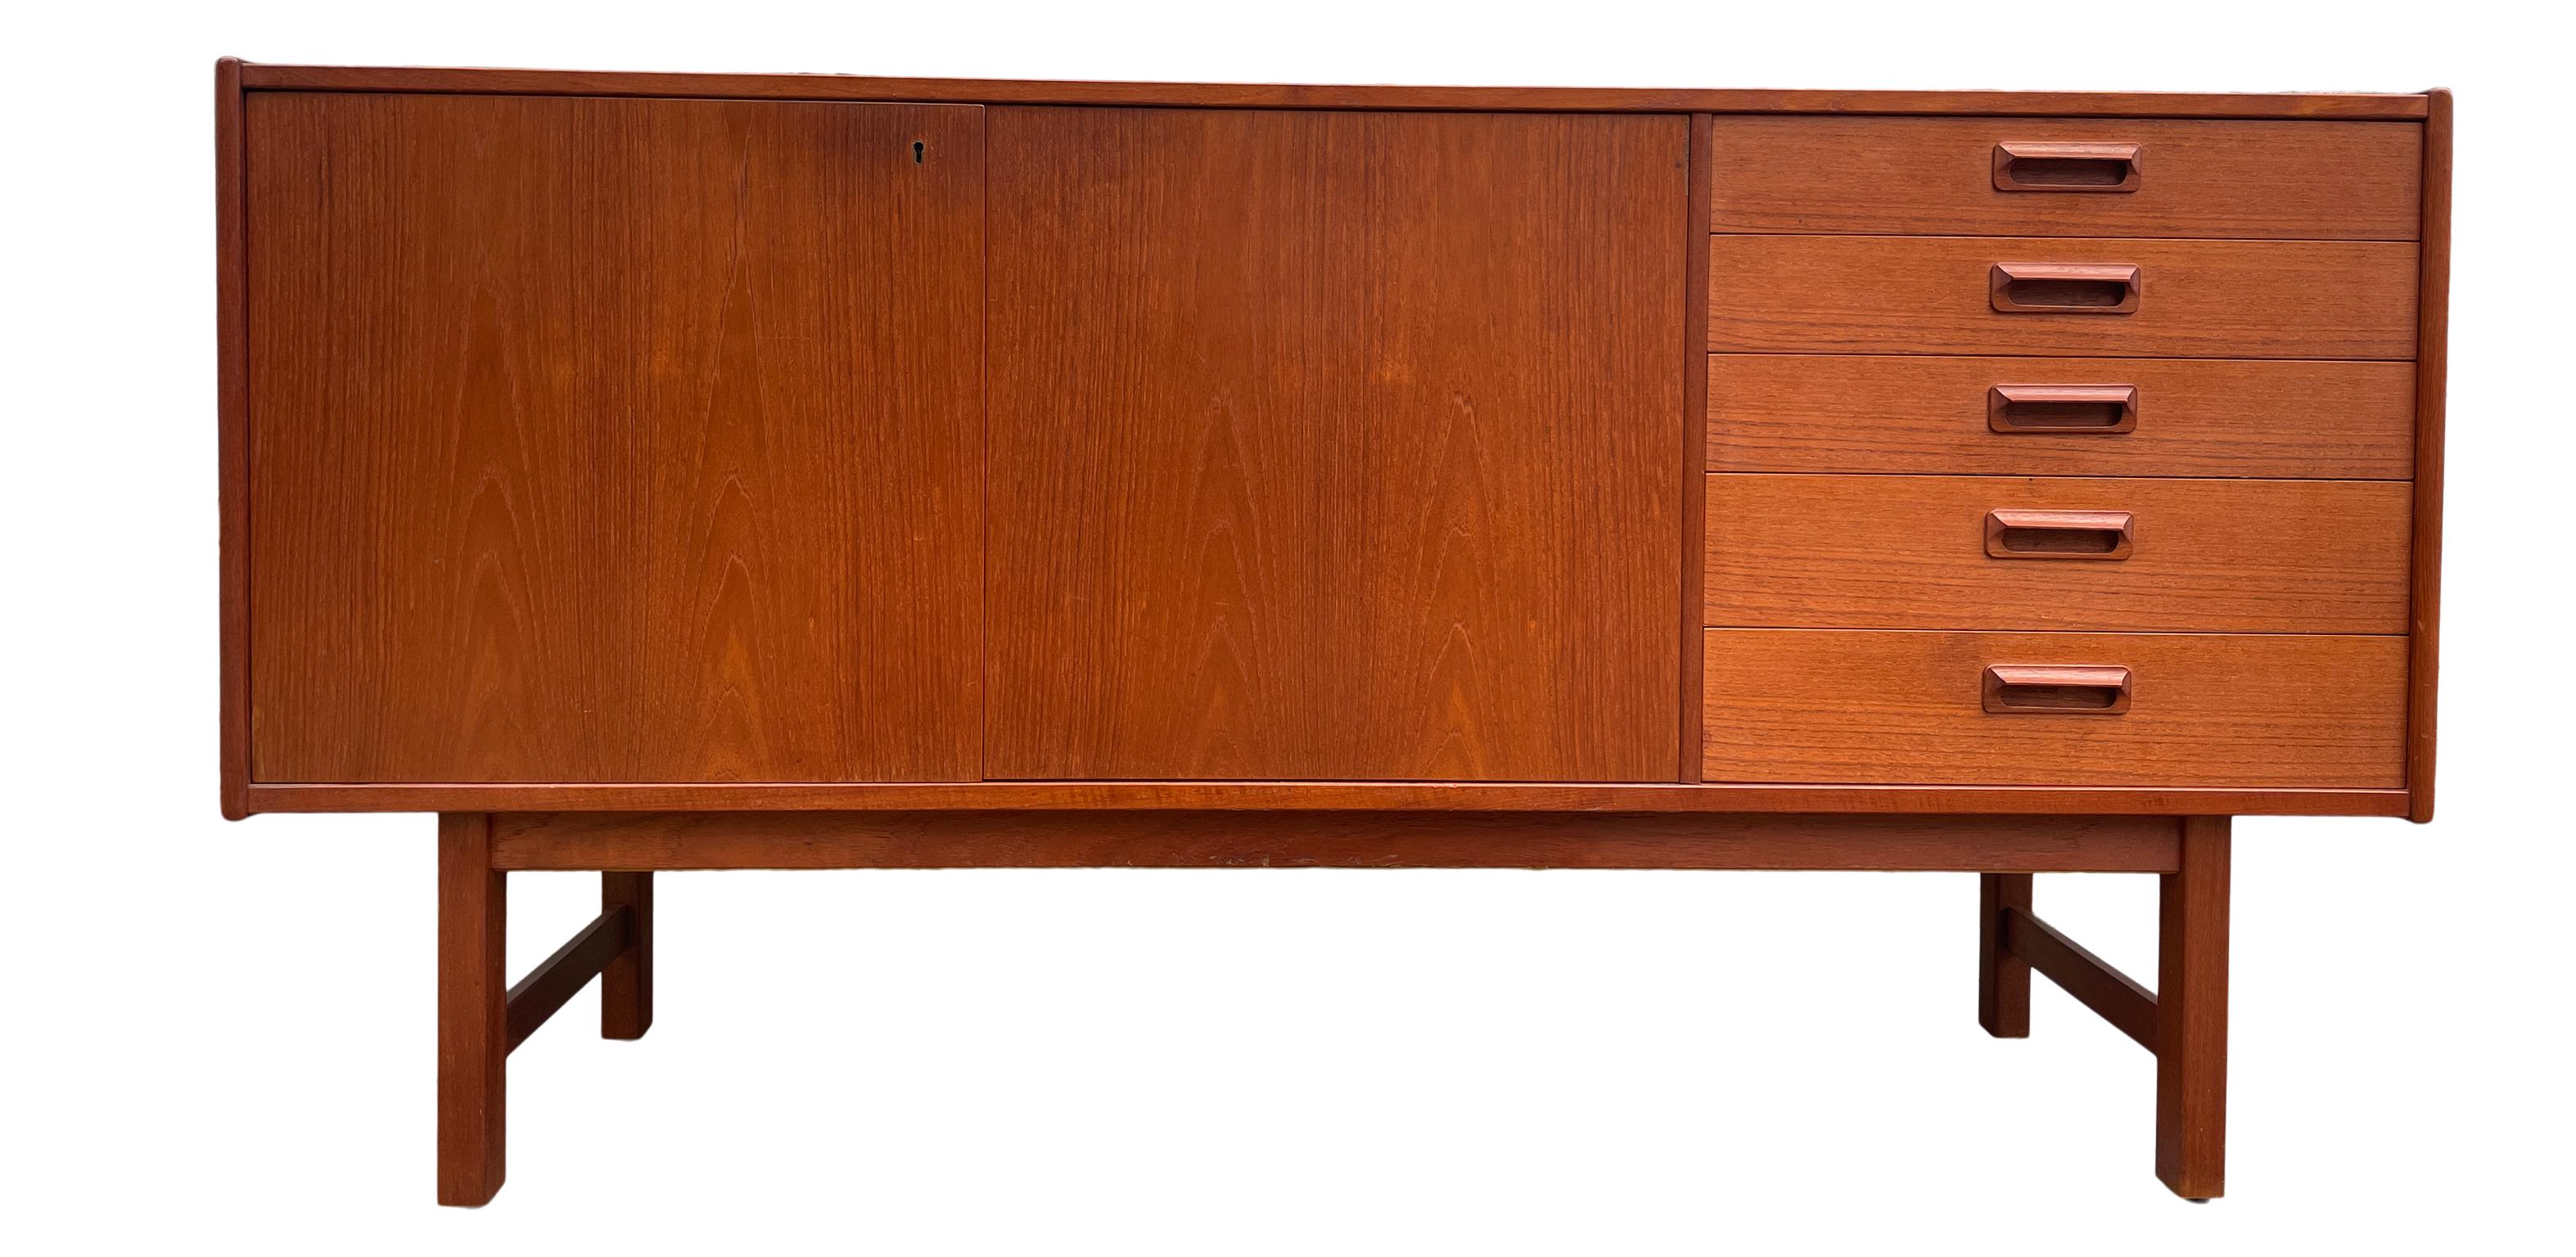 Mid century Swedish modern 5 drawer teak credenza with locking cabinet doors. beautiful teak sideboard - with 5 drawers - top drawer is felted with sections for flatware. Cabinet doors open to (1) long adjustable shelf with locking doors (1)